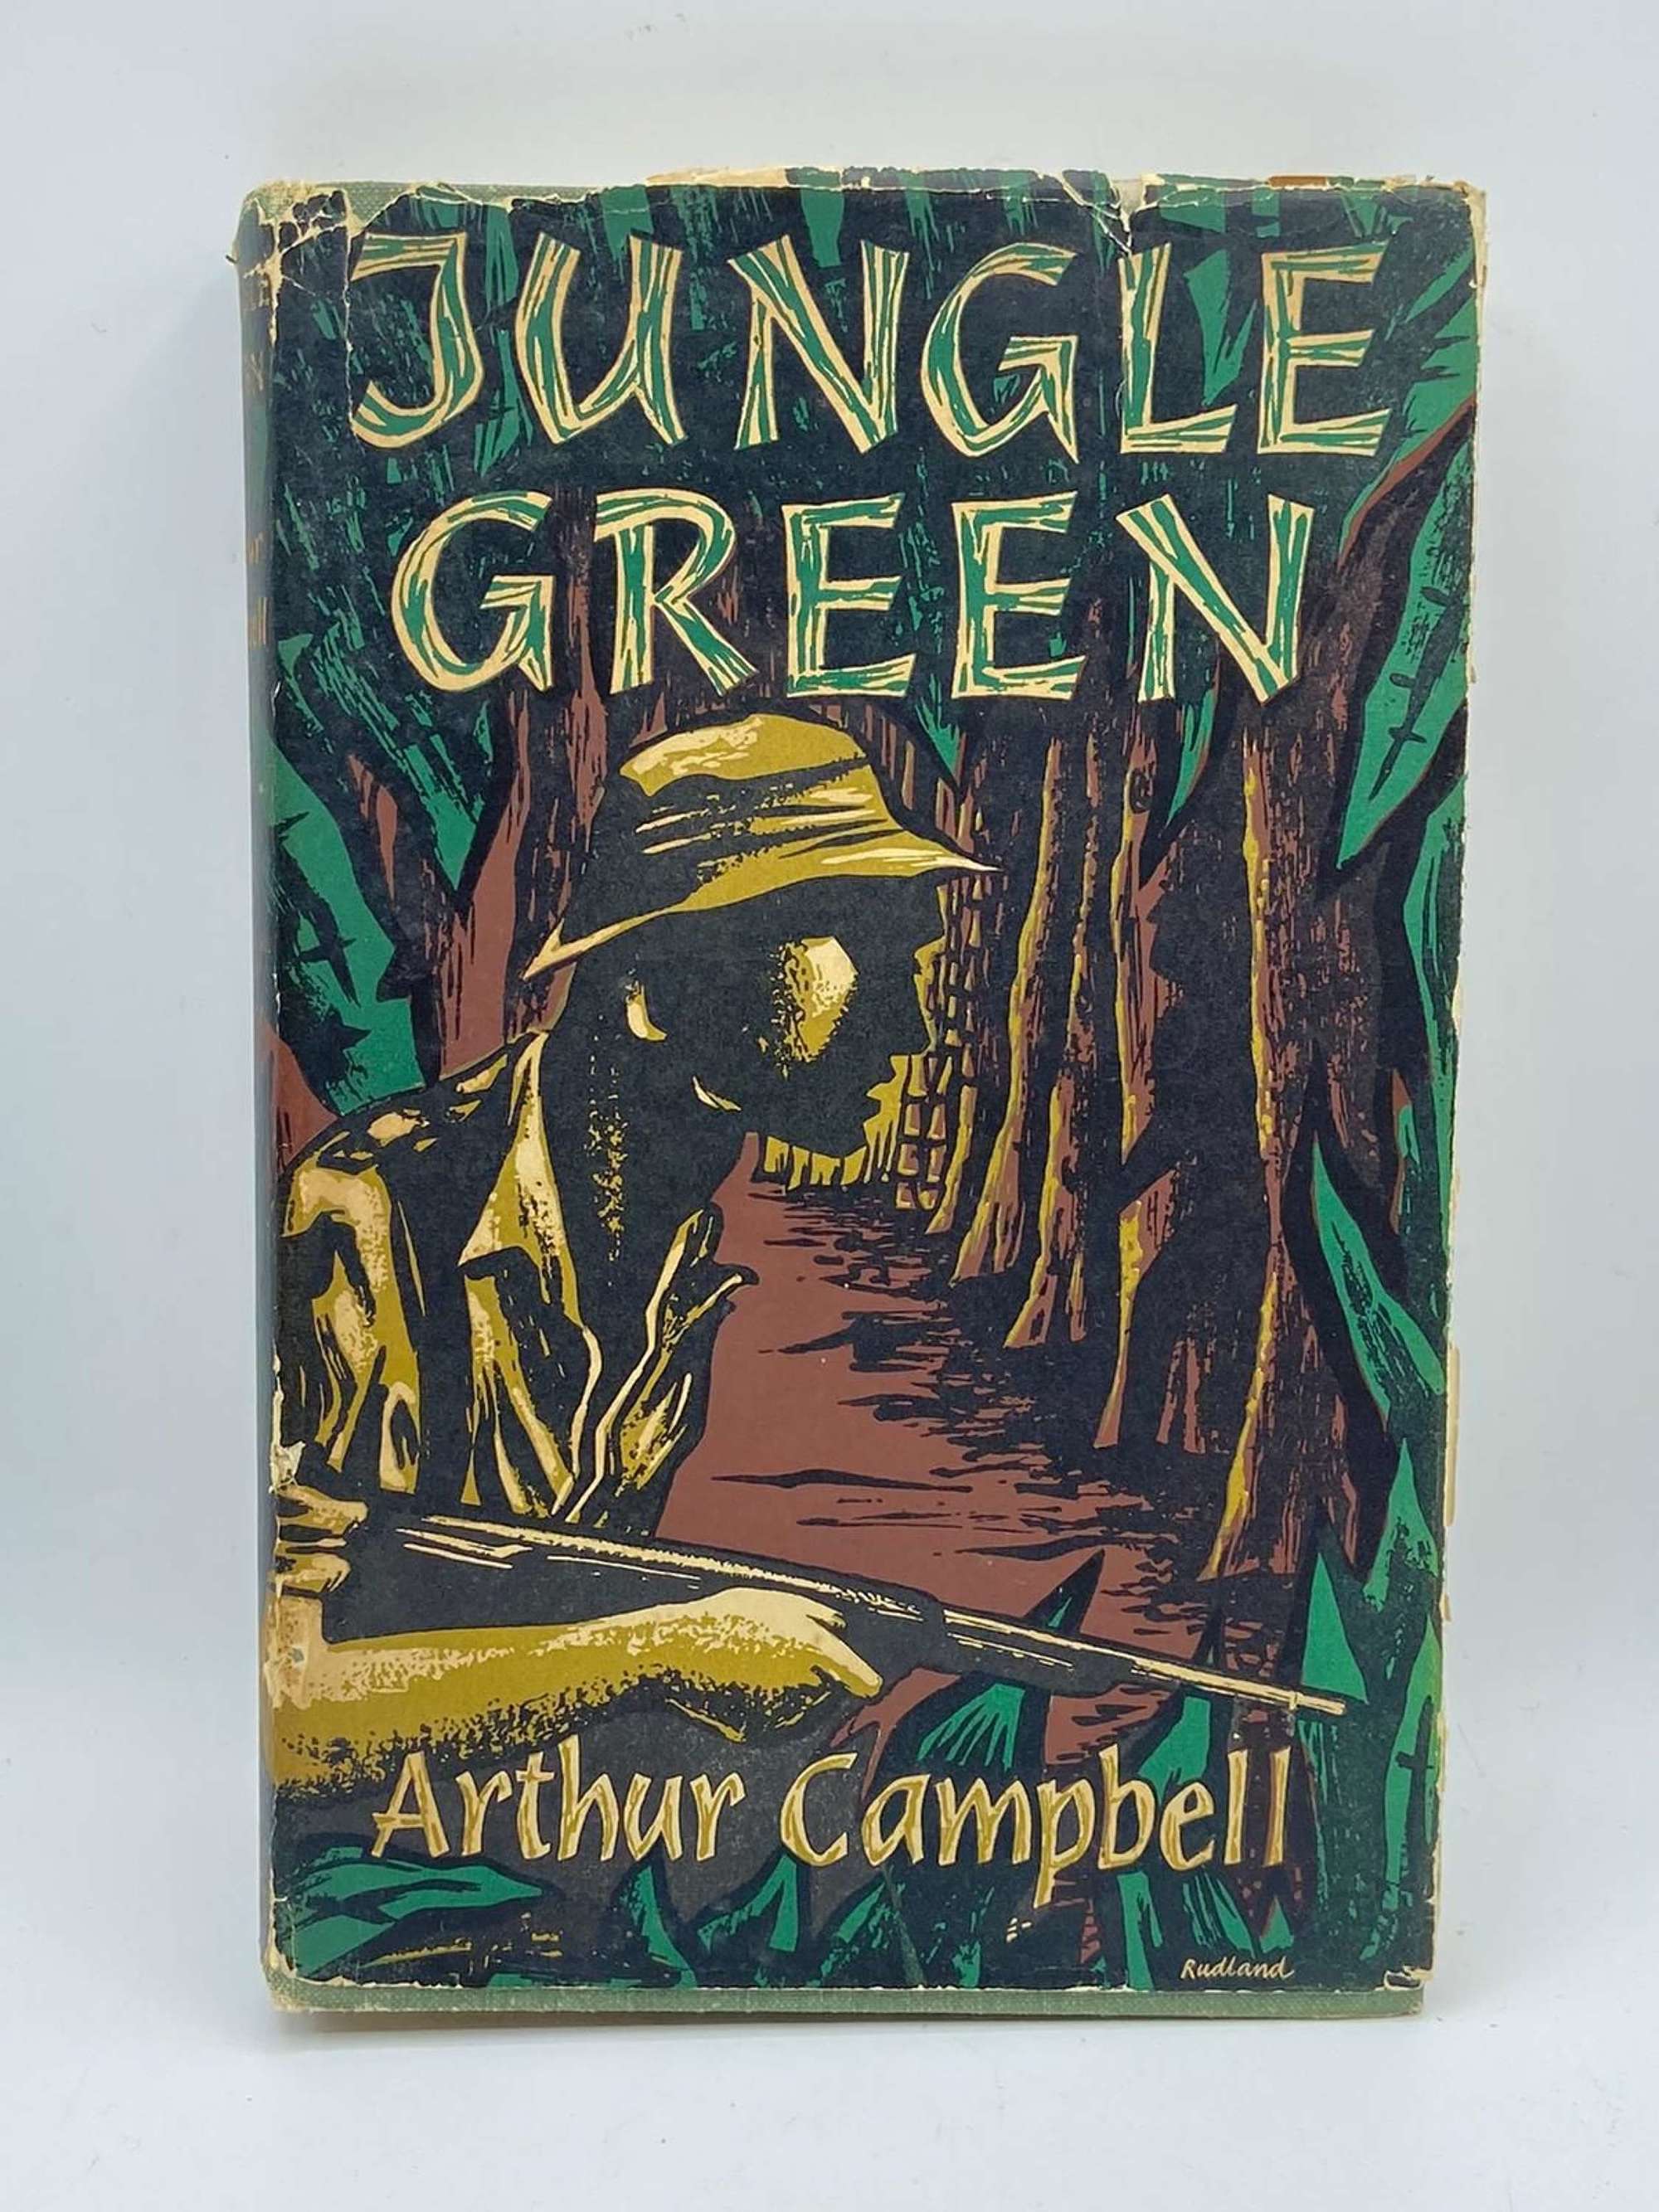 Post WW2 Malaya Campaign Book: Jungle Green By Arthur Campbell